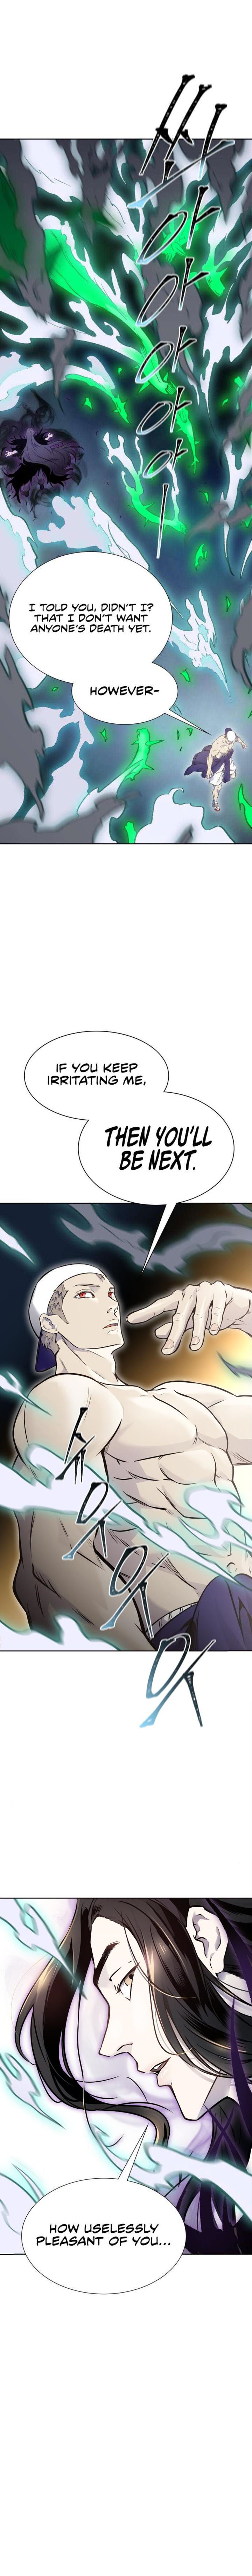 Tower Of God 599 25